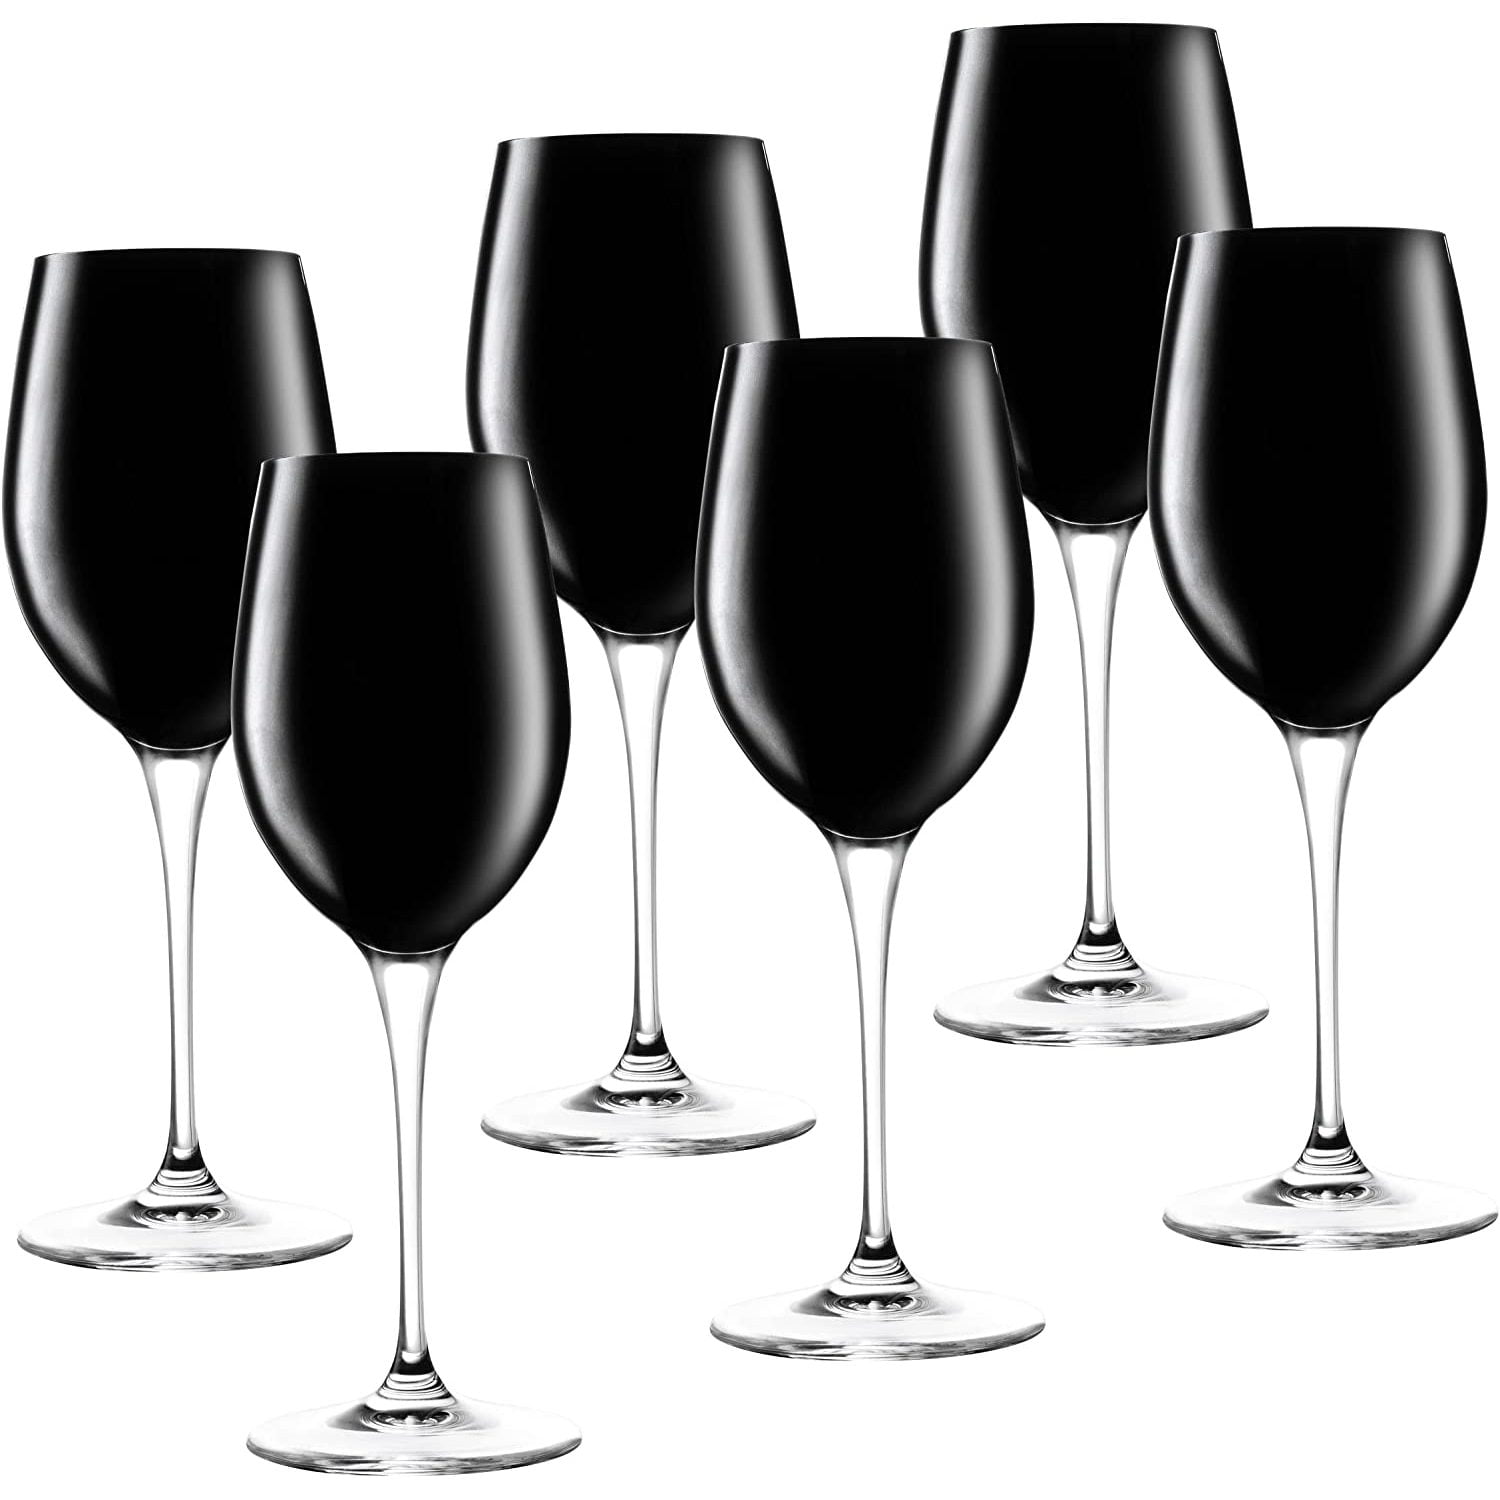 Goblet - Red Wine Glass - Crystal Glass - Water Glass - Bold Black